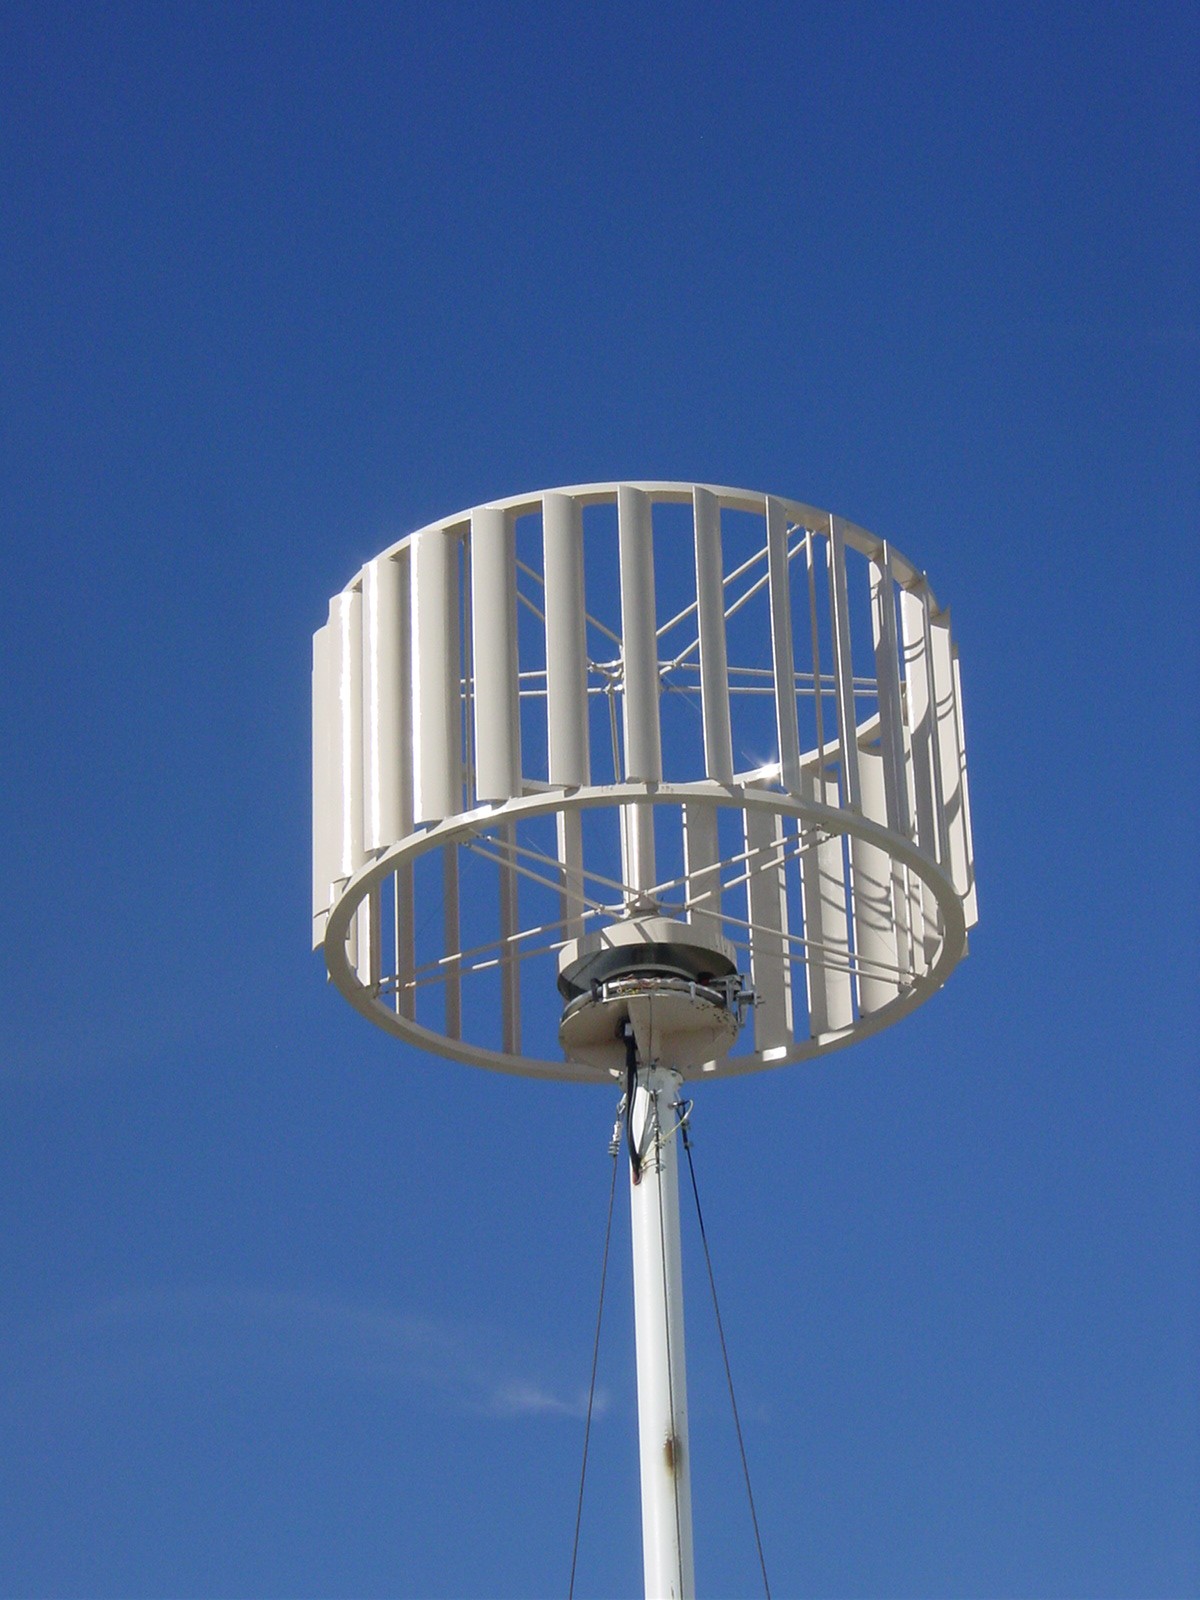  wind turbine technology, particularly in vertical axis wind turbines